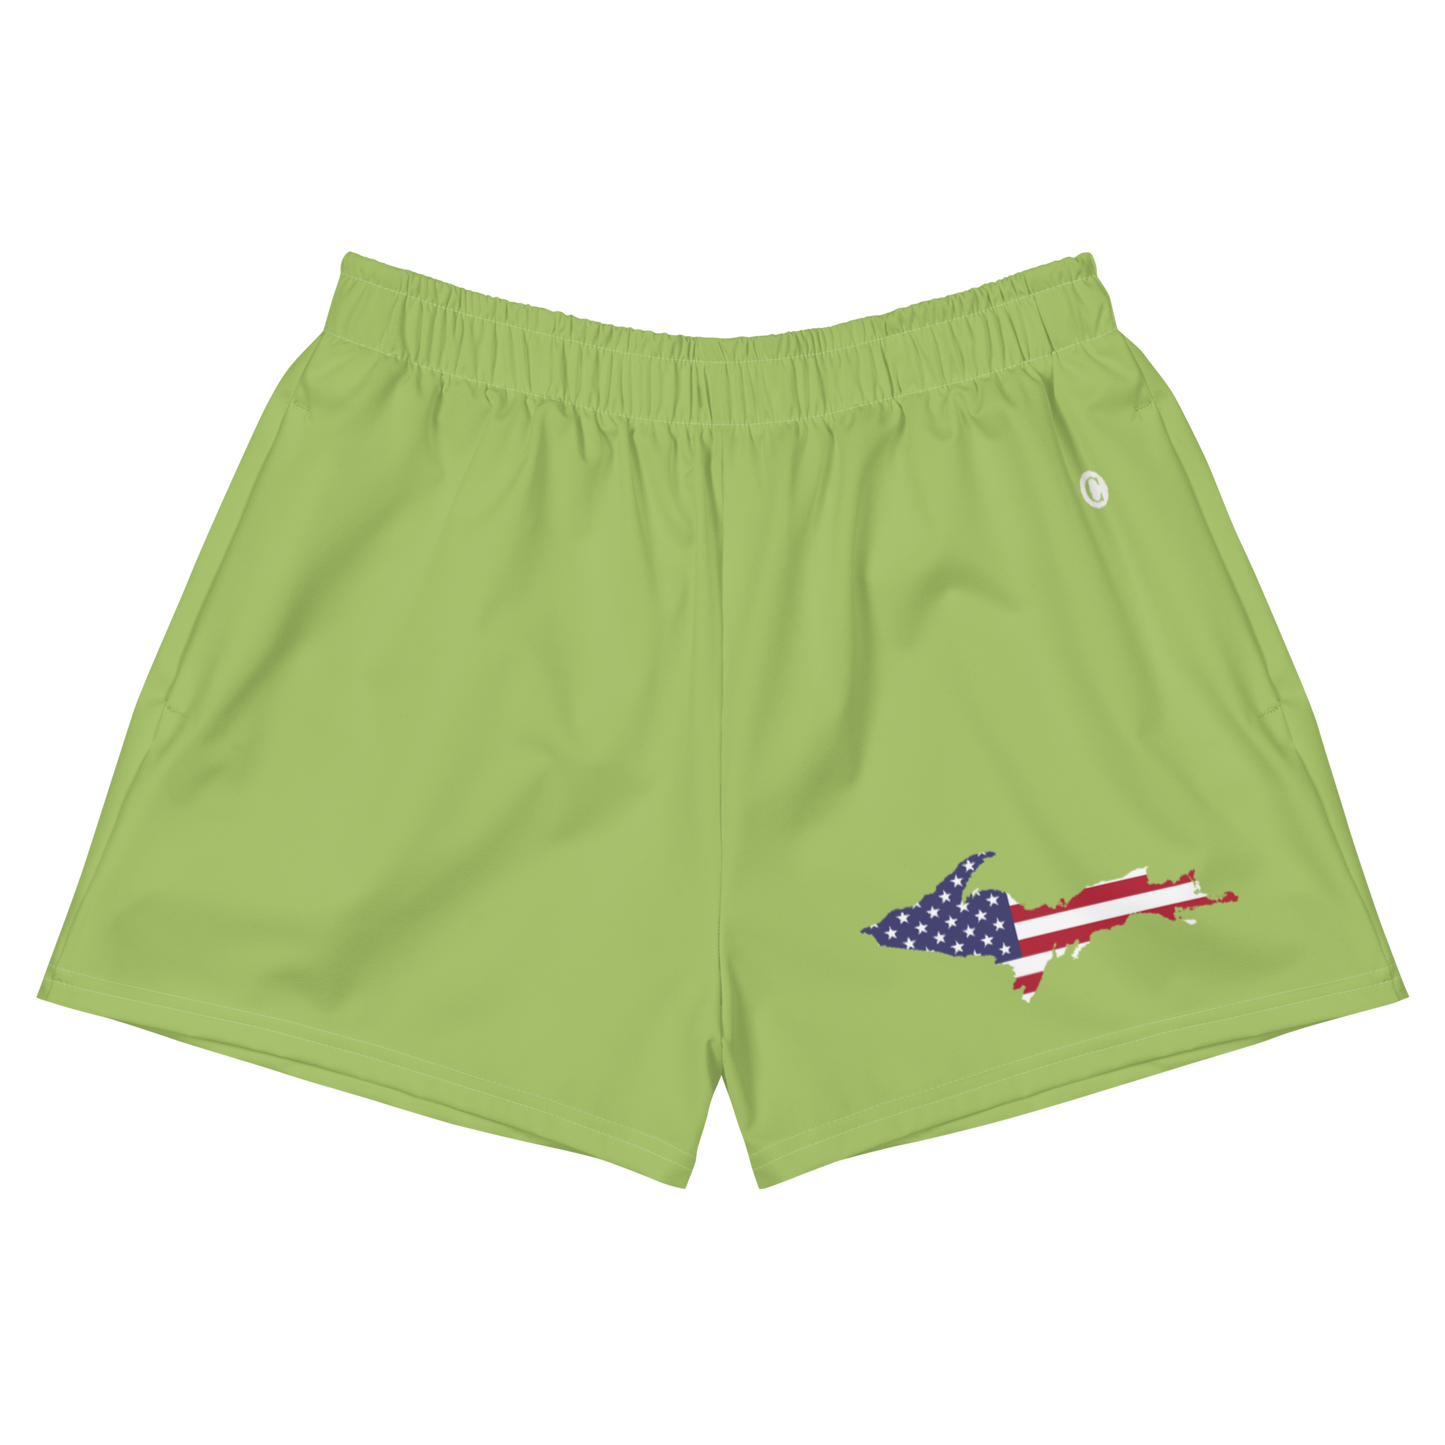 Michigan Upper Peninsula Athletic Shorts (w/ UP USA Flag Outline) | Women's - Gooseberry Green